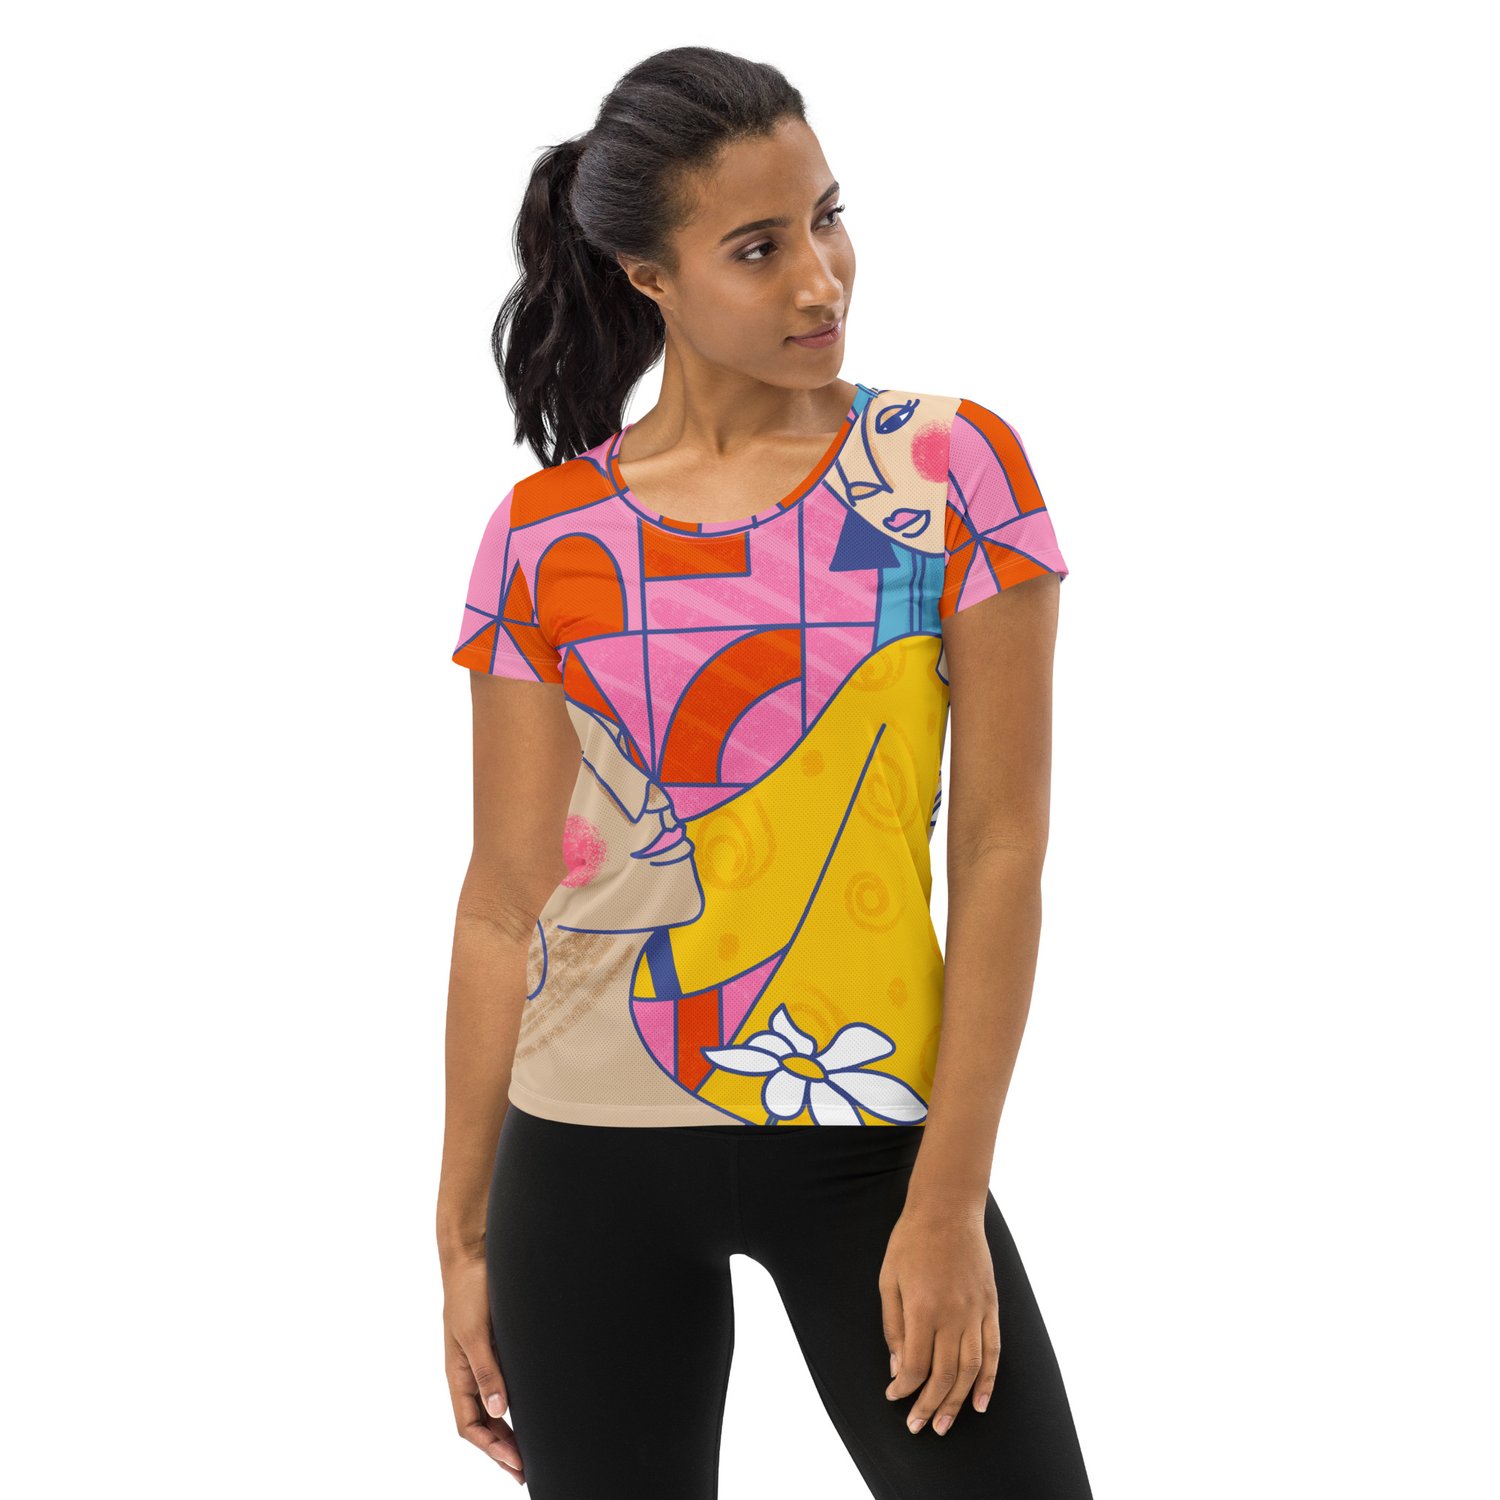 Bright Multicolor All-Over Print Women's Athletic T-shirt with Art Print —  Veronika Czimmermann